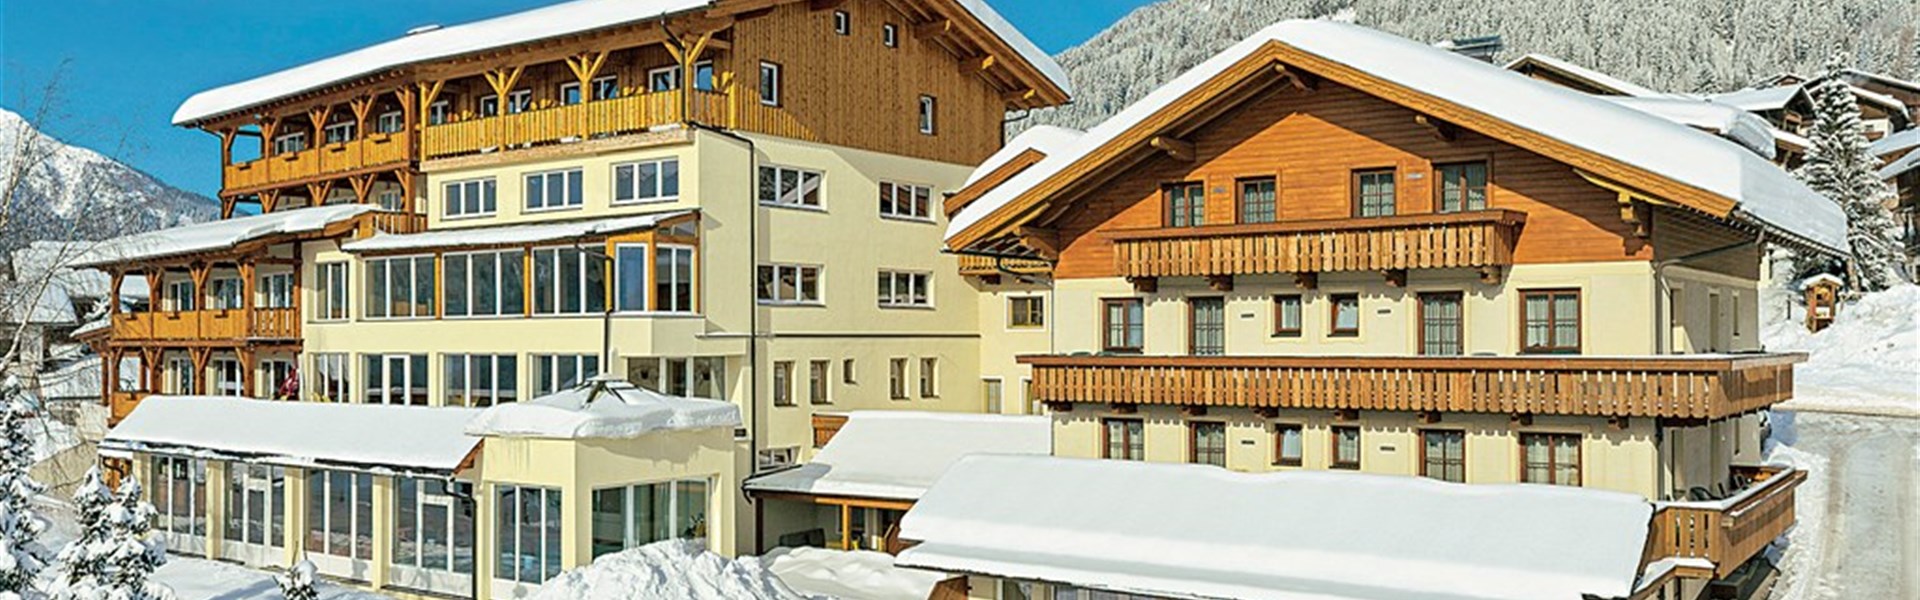 Marco Polo - Hotel Gasthof Andreas (W) - 